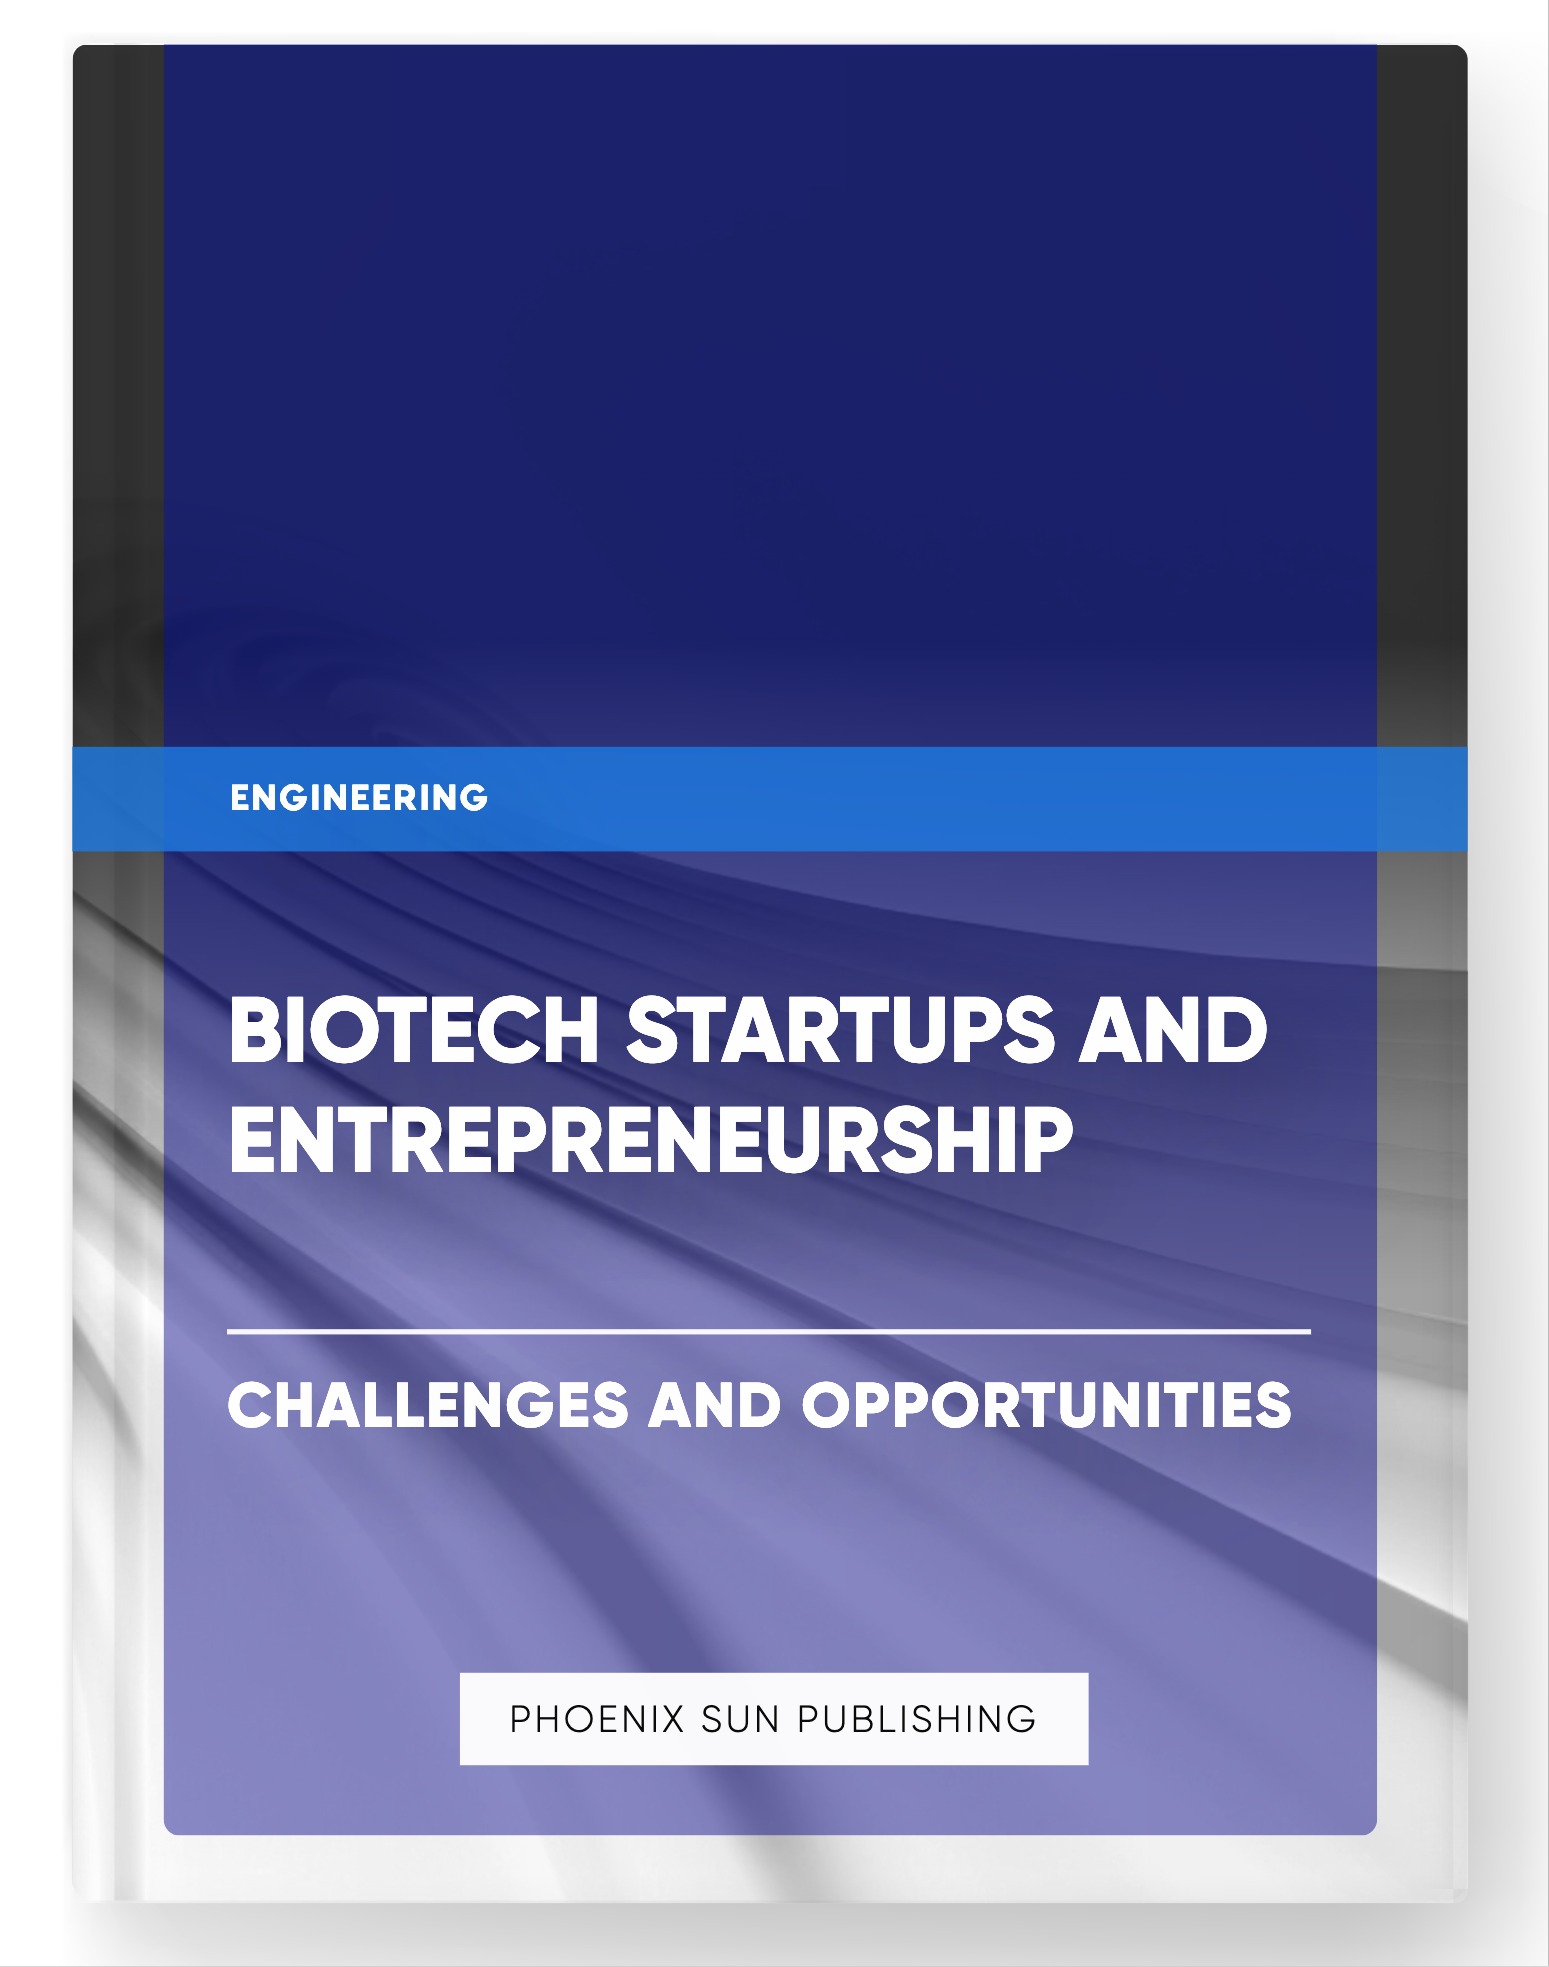 Biotech Startups and Entrepreneurship – Challenges and Opportunities